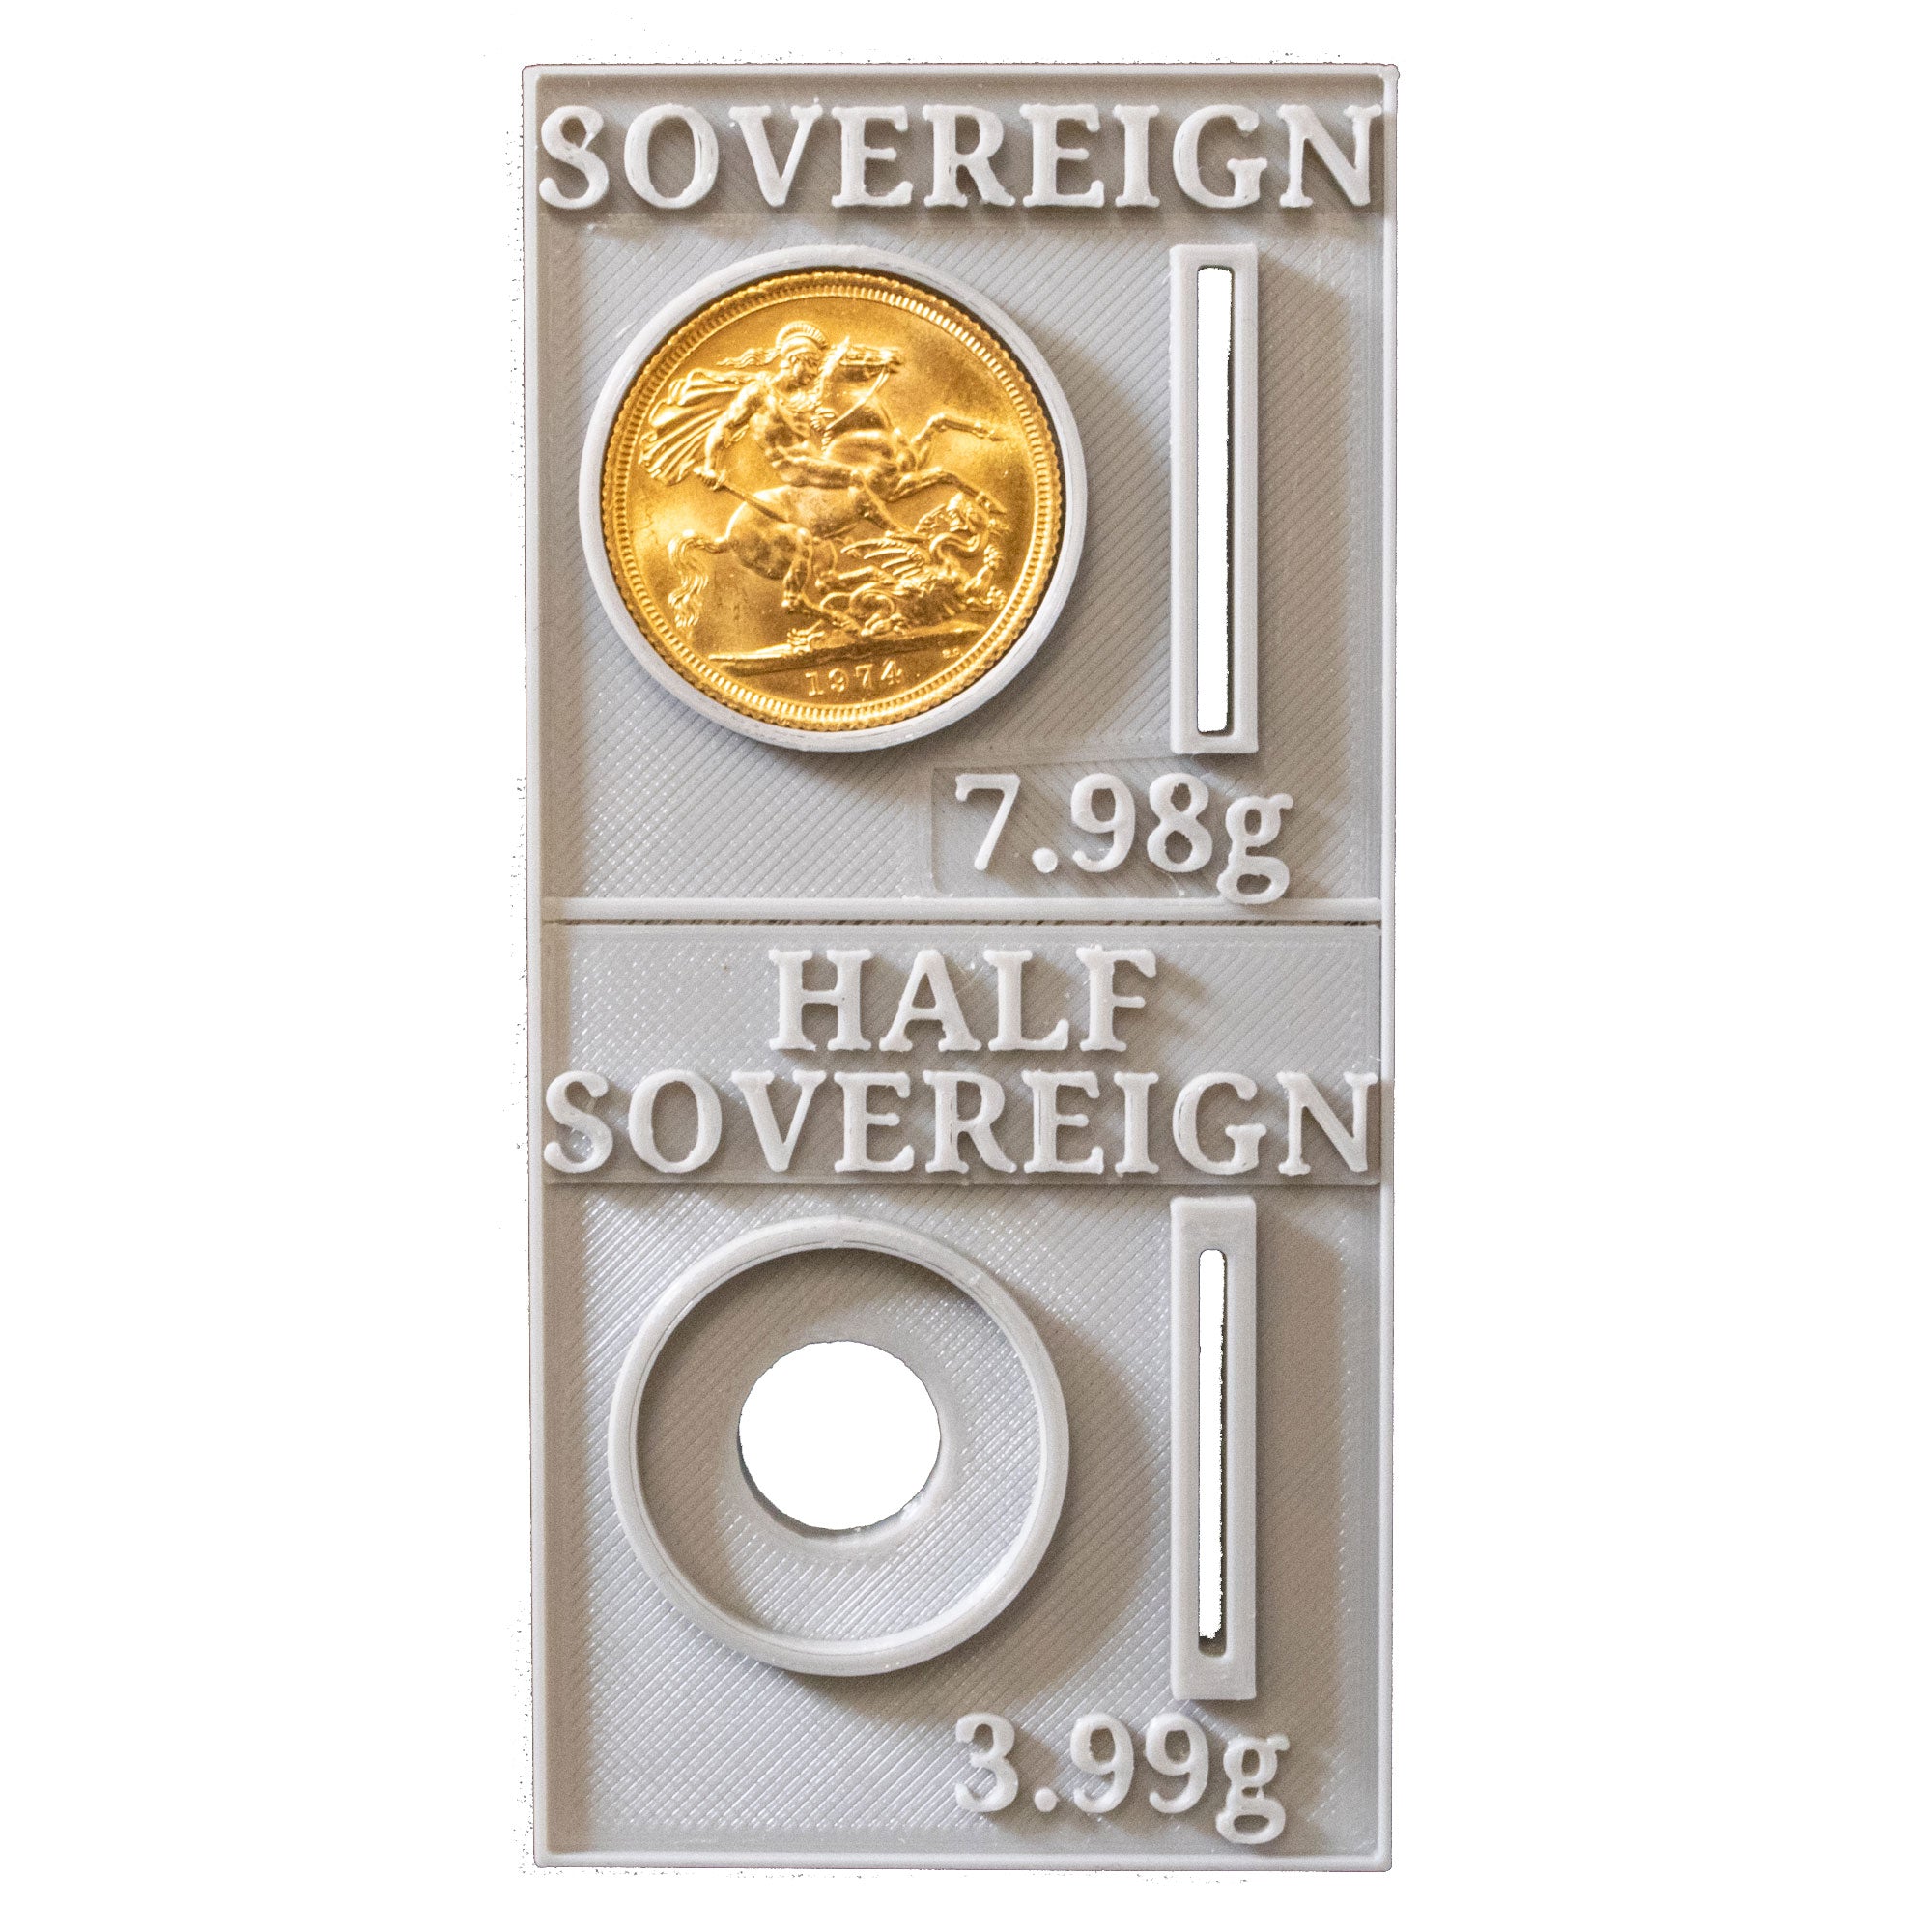 Sovereign coin tester (including scale)